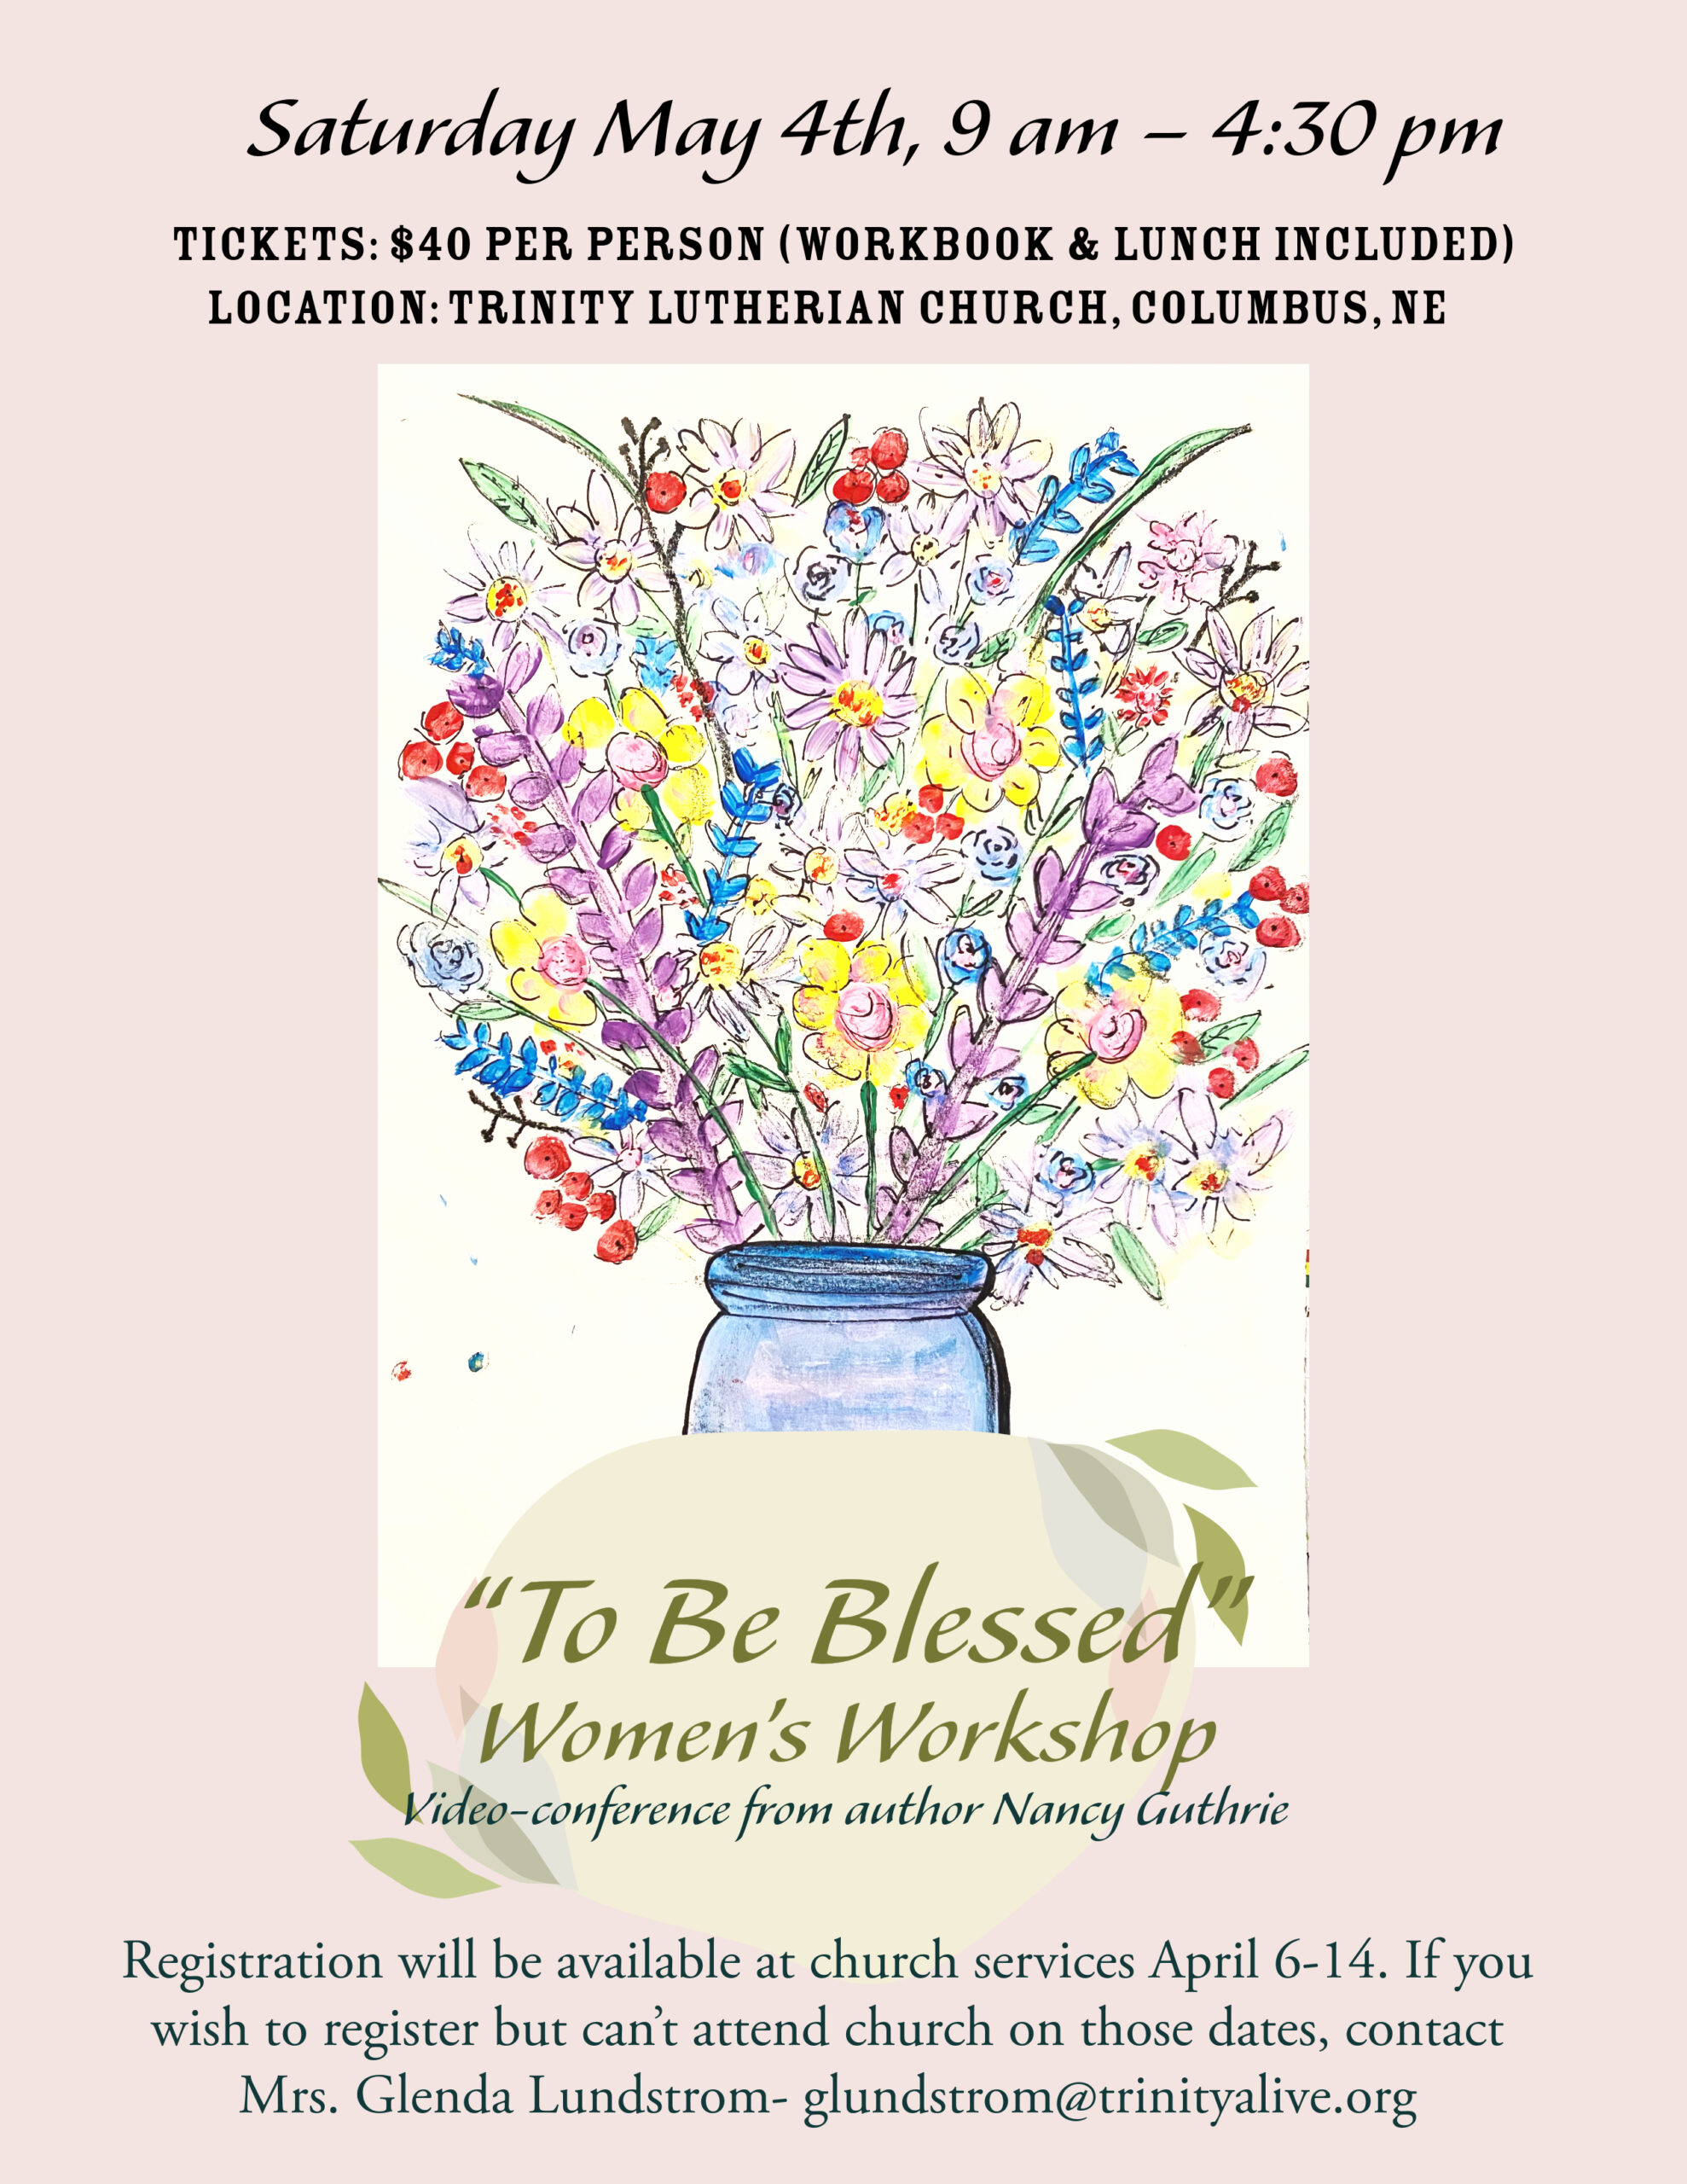 “To Be Blessed” Women’s Workshop